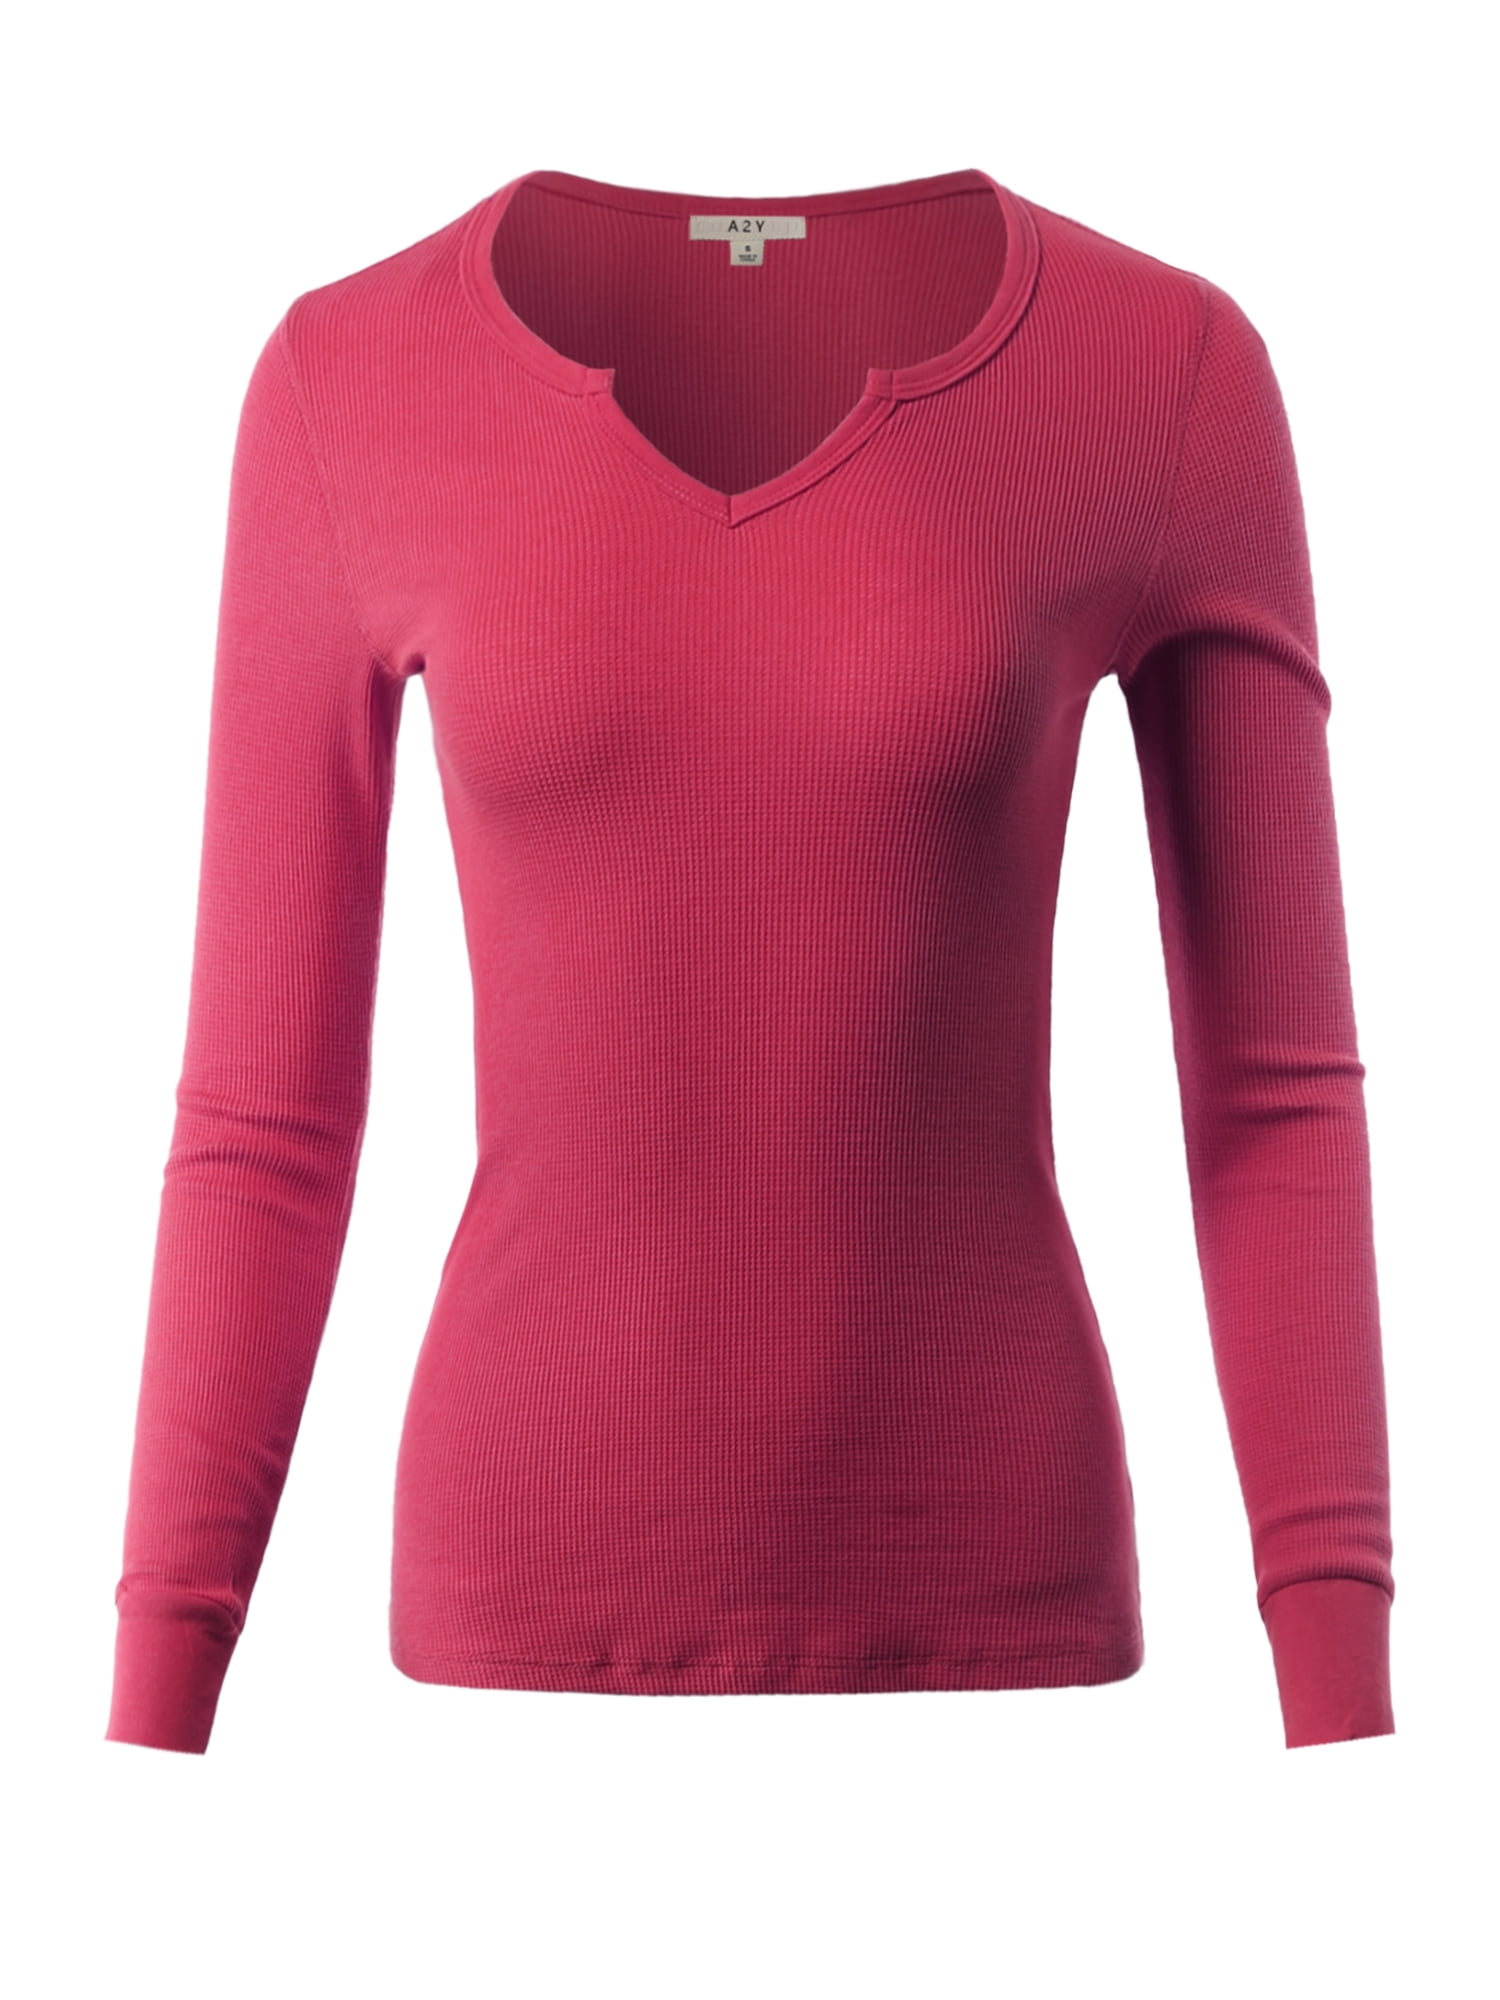 A2Y - A2Y Women's Fitted Notched Neck Long Sleeve Thermal Knit Top Hot